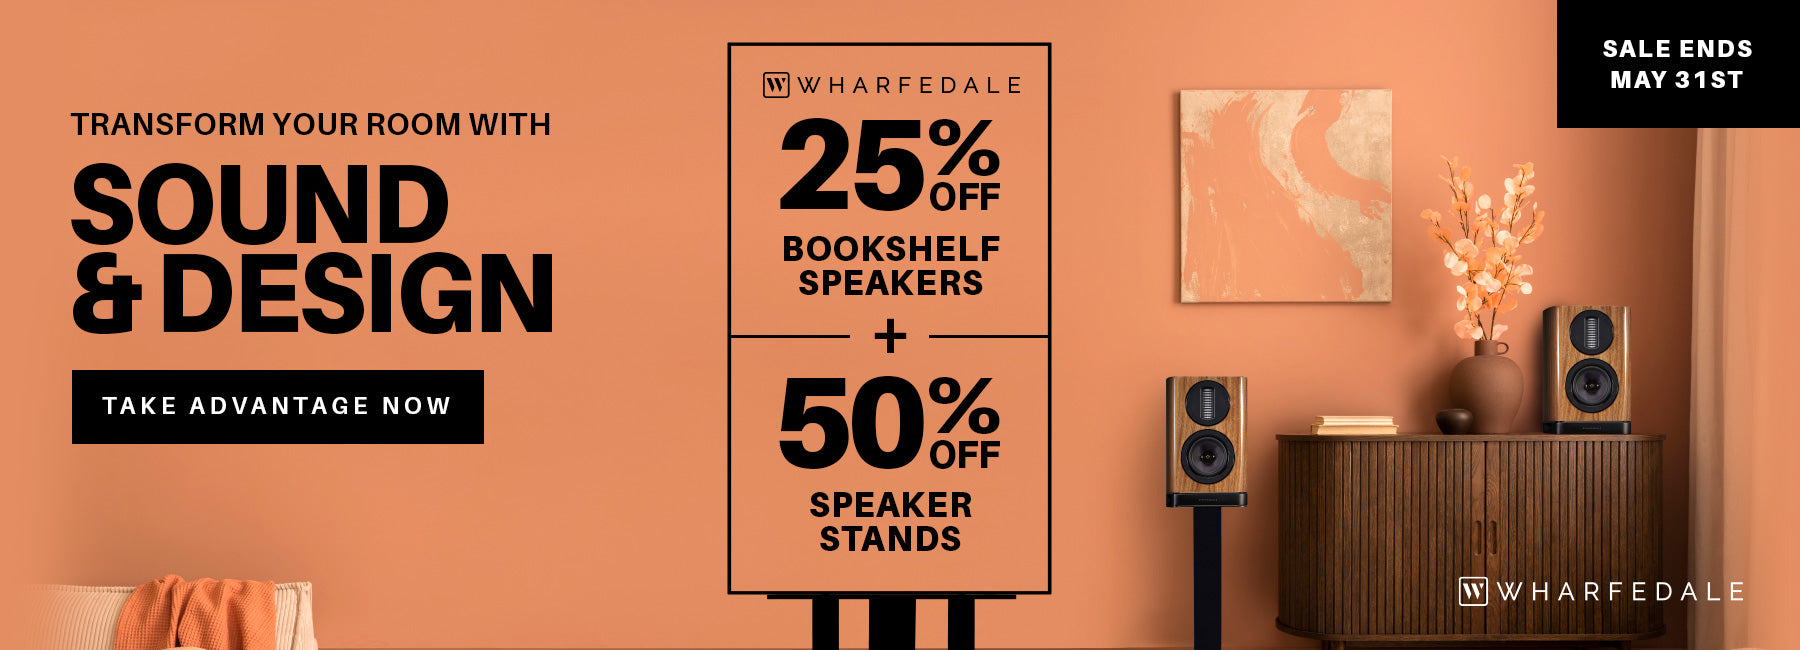 Transform your room with sound and design: 25% Off Wharfedale Bookshelf Speakers + 50% Off Speaker Stands